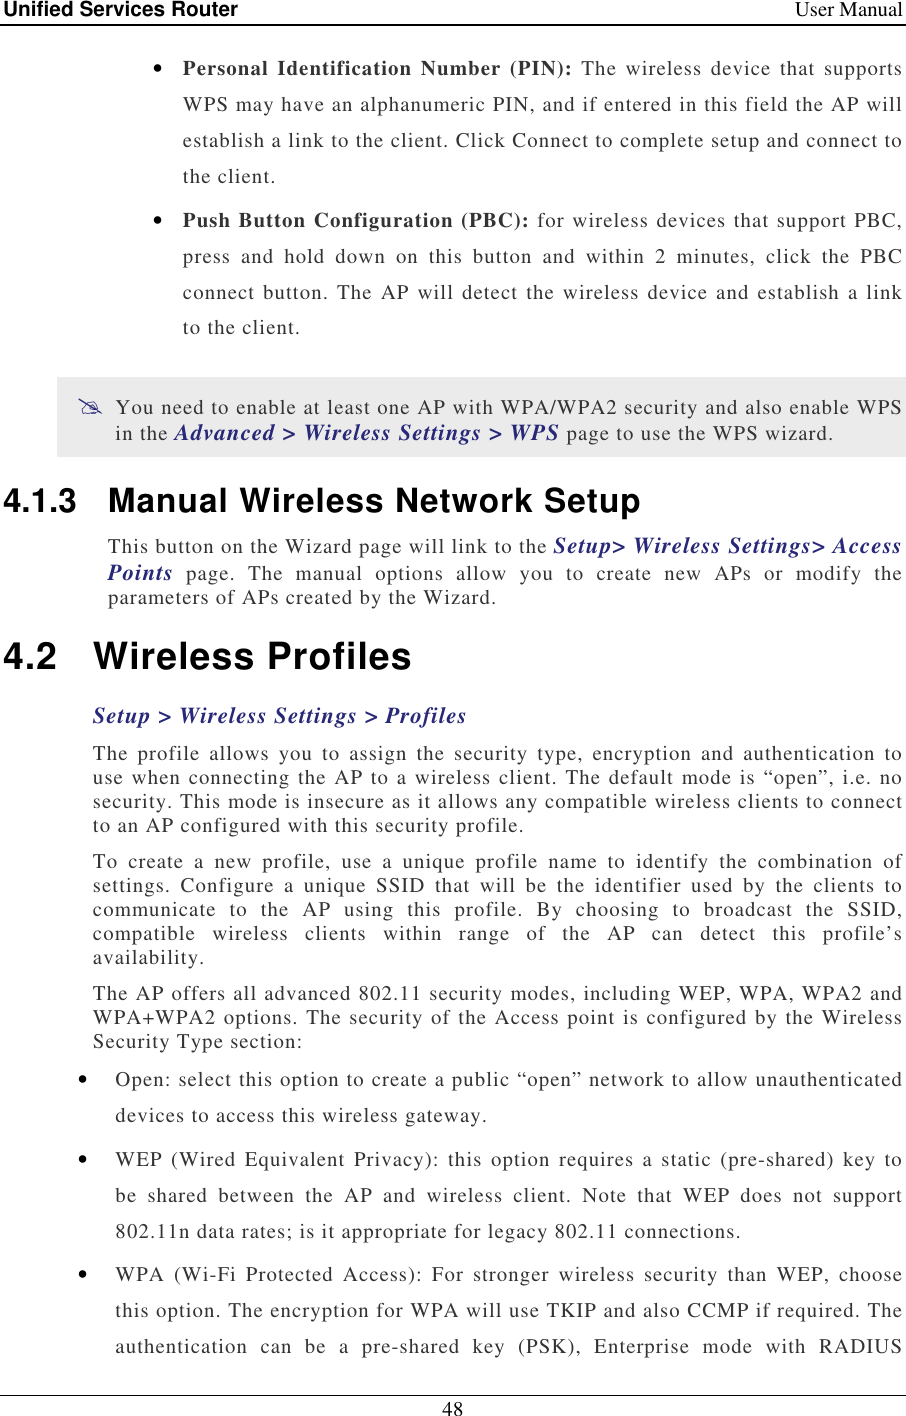 Unified Services Router    User Manual 48  • Personal Identification  Number  (PIN):  The  wireless  device  that  supports WPS may have an alphanumeric PIN, and if entered in this field the AP will establish a link to the client. Click Connect to complete setup and connect to the client.  • Push Button Configuration (PBC): for wireless devices that support PBC, press  and  hold  down  on  this  button  and  within  2  minutes,  click  the  PBC connect  button. The  AP  will detect the  wireless device and  establish a link to the client.   You need to enable at least one AP with WPA/WPA2 security and also enable WPS in the Advanced &gt; Wireless Settings &gt; WPS page to use the WPS wizard. 4.1.3  Manual Wireless Network Setup This button on the Wizard page will link to the Setup&gt; Wireless Settings&gt; Access Points  page.  The  manual  options  allow  you  to  create  new  APs  or  modify  the parameters of APs created by the Wizard.  4.2  Wireless Profiles Setup &gt; Wireless Settings &gt; Profiles  The  profile  allows  you  to  assign  the  security  type,  encryption  and  authentication  to use when connecting the AP to a wireless client. The default mode is “open”, i.e. no security. This mode is insecure as it allows any compatible wireless clients to connect to an AP configured with this security profile.  To  create  a  new  profile,  use  a  unique  profile  name  to  identify  the  combination  of settings.  Configure  a  unique  SSID  that  will  be  the  identifier  used  by  the  clients  to communicate  to  the  AP  using  this  profile.  By  choosing  to  broadcast  the  SSID, compatible  wireless  clients  within  range  of  the  AP  can  detect  this  profile’s availability.  The AP offers all advanced 802.11 security modes, including WEP, WPA, WPA2 and WPA+WPA2 options. The security of the Access point is configured by the Wireless Security Type section: • Open: select this option to create a public “open” network to allow unauthenticated devices to access this wireless gateway. • WEP (Wired Equivalent  Privacy):  this  option  requires  a  static  (pre-shared)  key to be  shared  between  the  AP  and  wireless  client.  Note  that  WEP  does  not  support 802.11n data rates; is it appropriate for legacy 802.11 connections.  • WPA  (Wi-Fi  Protected  Access):  For  stronger  wireless  security  than  WEP,  choose this option. The encryption for WPA will use TKIP and also CCMP if required. The authentication  can  be  a  pre-shared  key  (PSK),  Enterprise  mode  with  RADIUS 